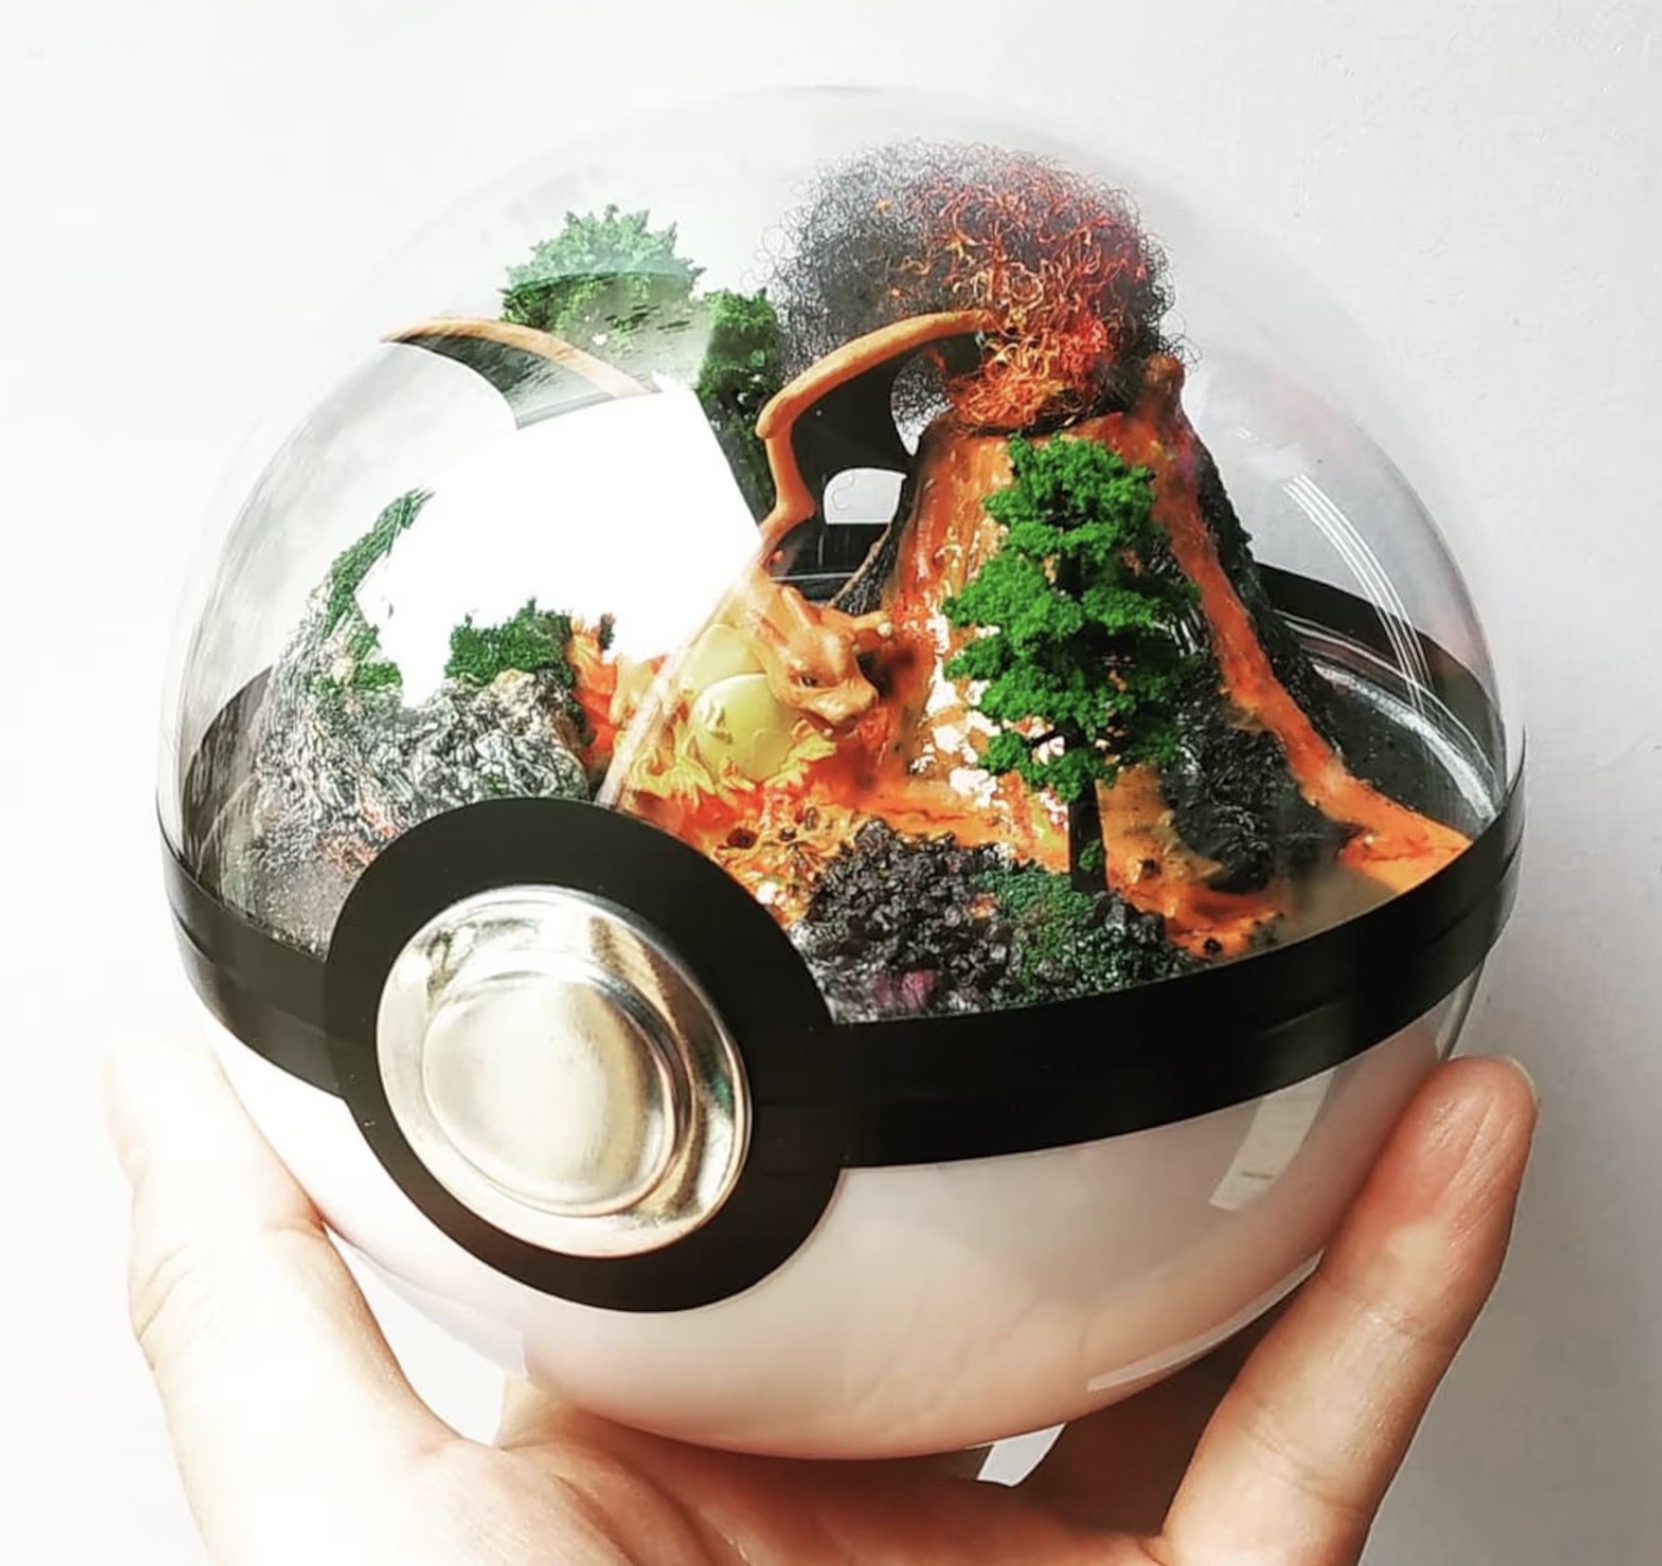 37 Inspiring Gifts For Anime Lovers That They Will Adore – Loveable